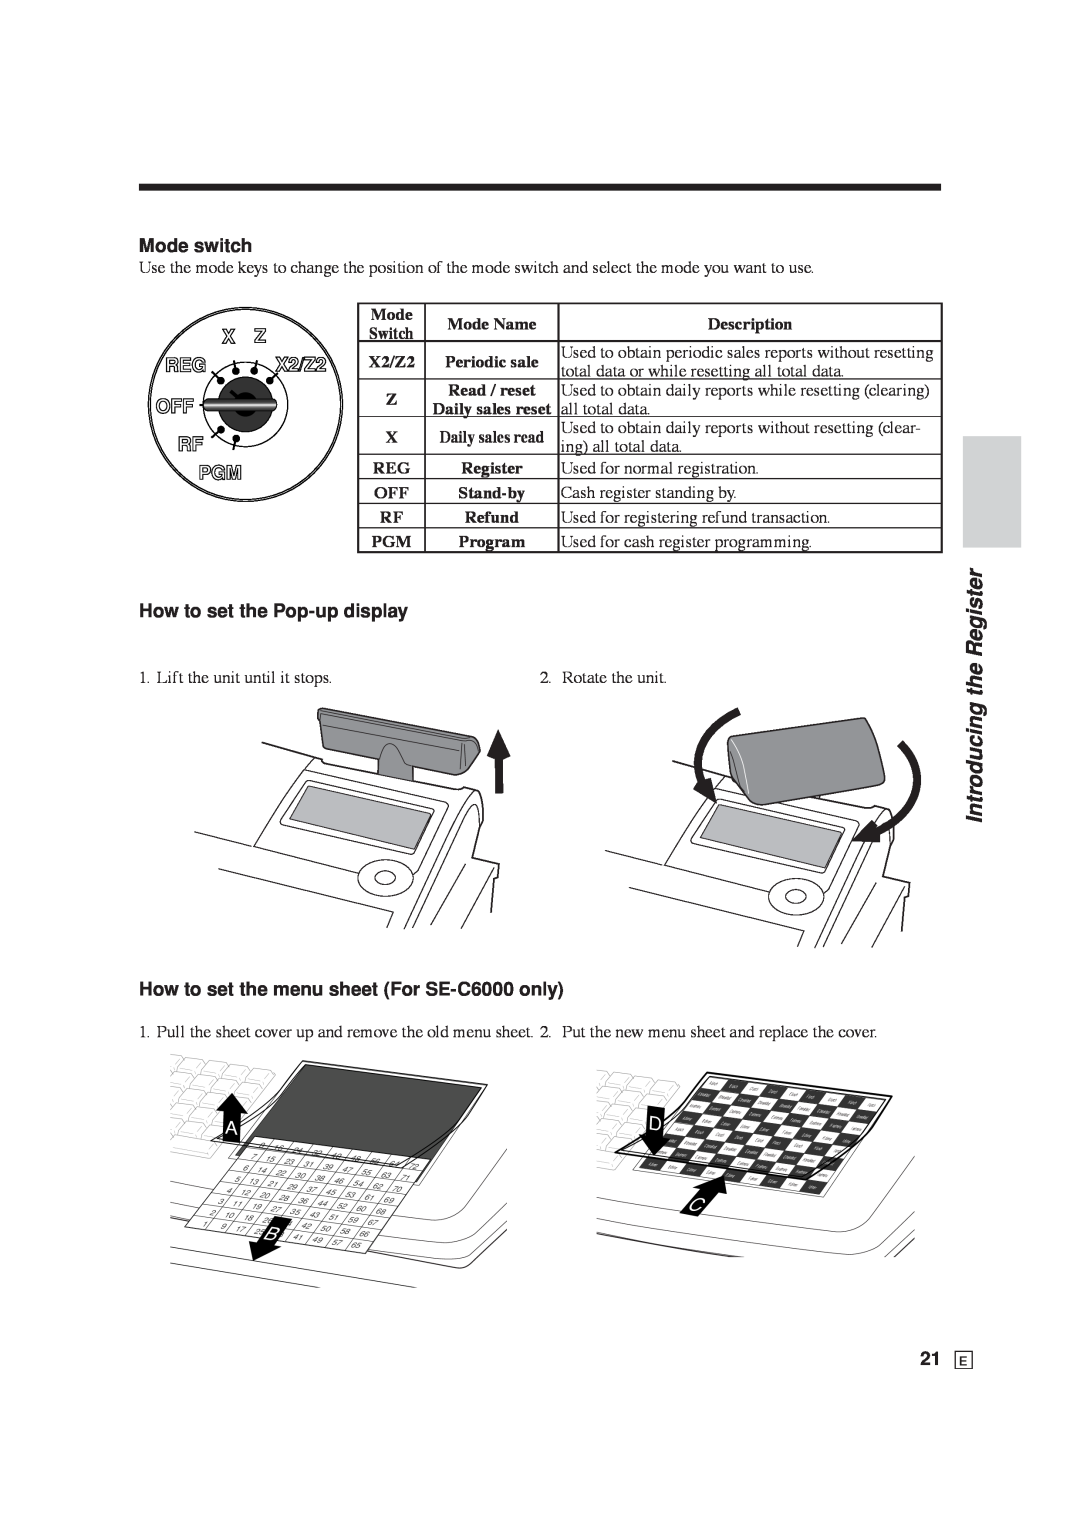 Casio SE-C6000, SE-S6000 user manual Introducing the Register, Mode switch, X2/Z2, How to set the Pop-up display 